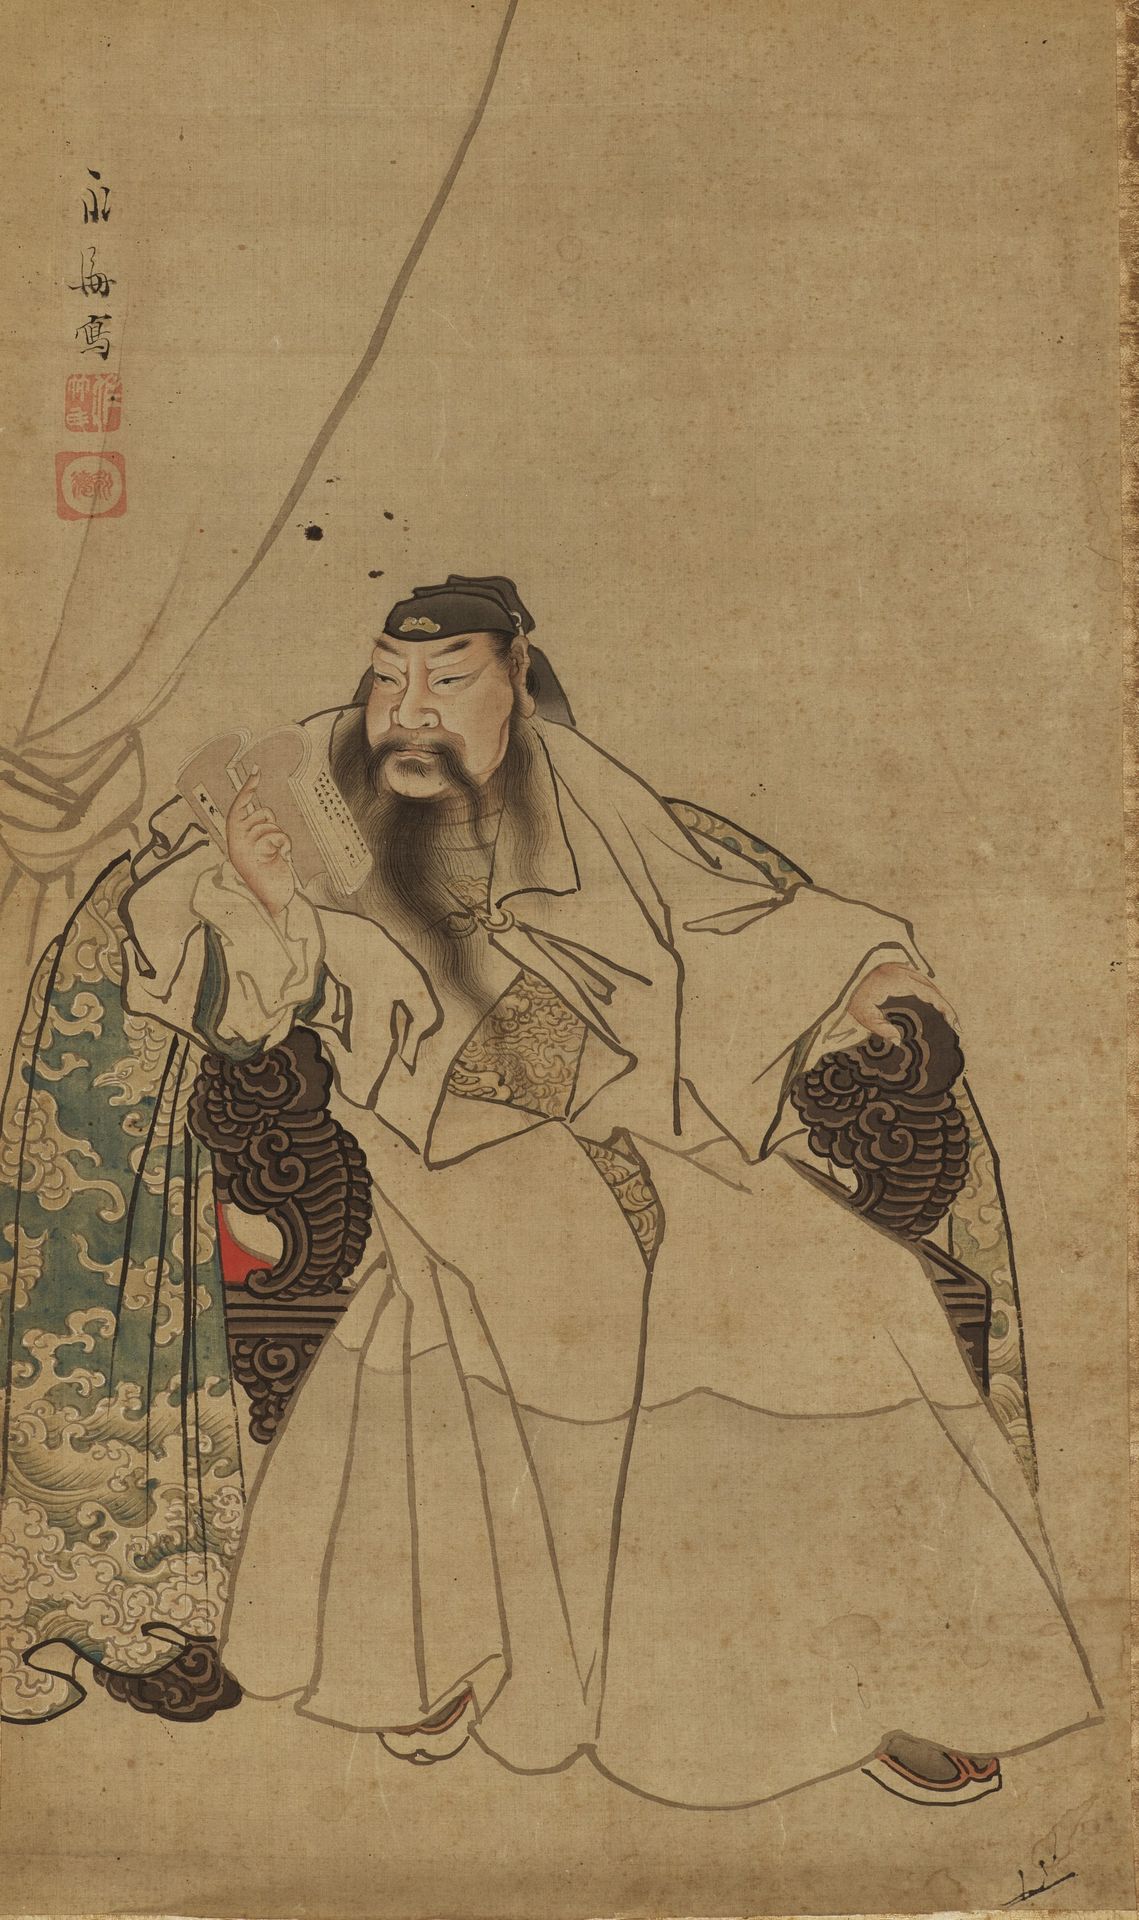 ‘GUAN YU READING THE SPRING AND AUTUMN ANNALS’, MING DYNASTY 关羽读春秋》，明朝
中国，1368-1&hellip;